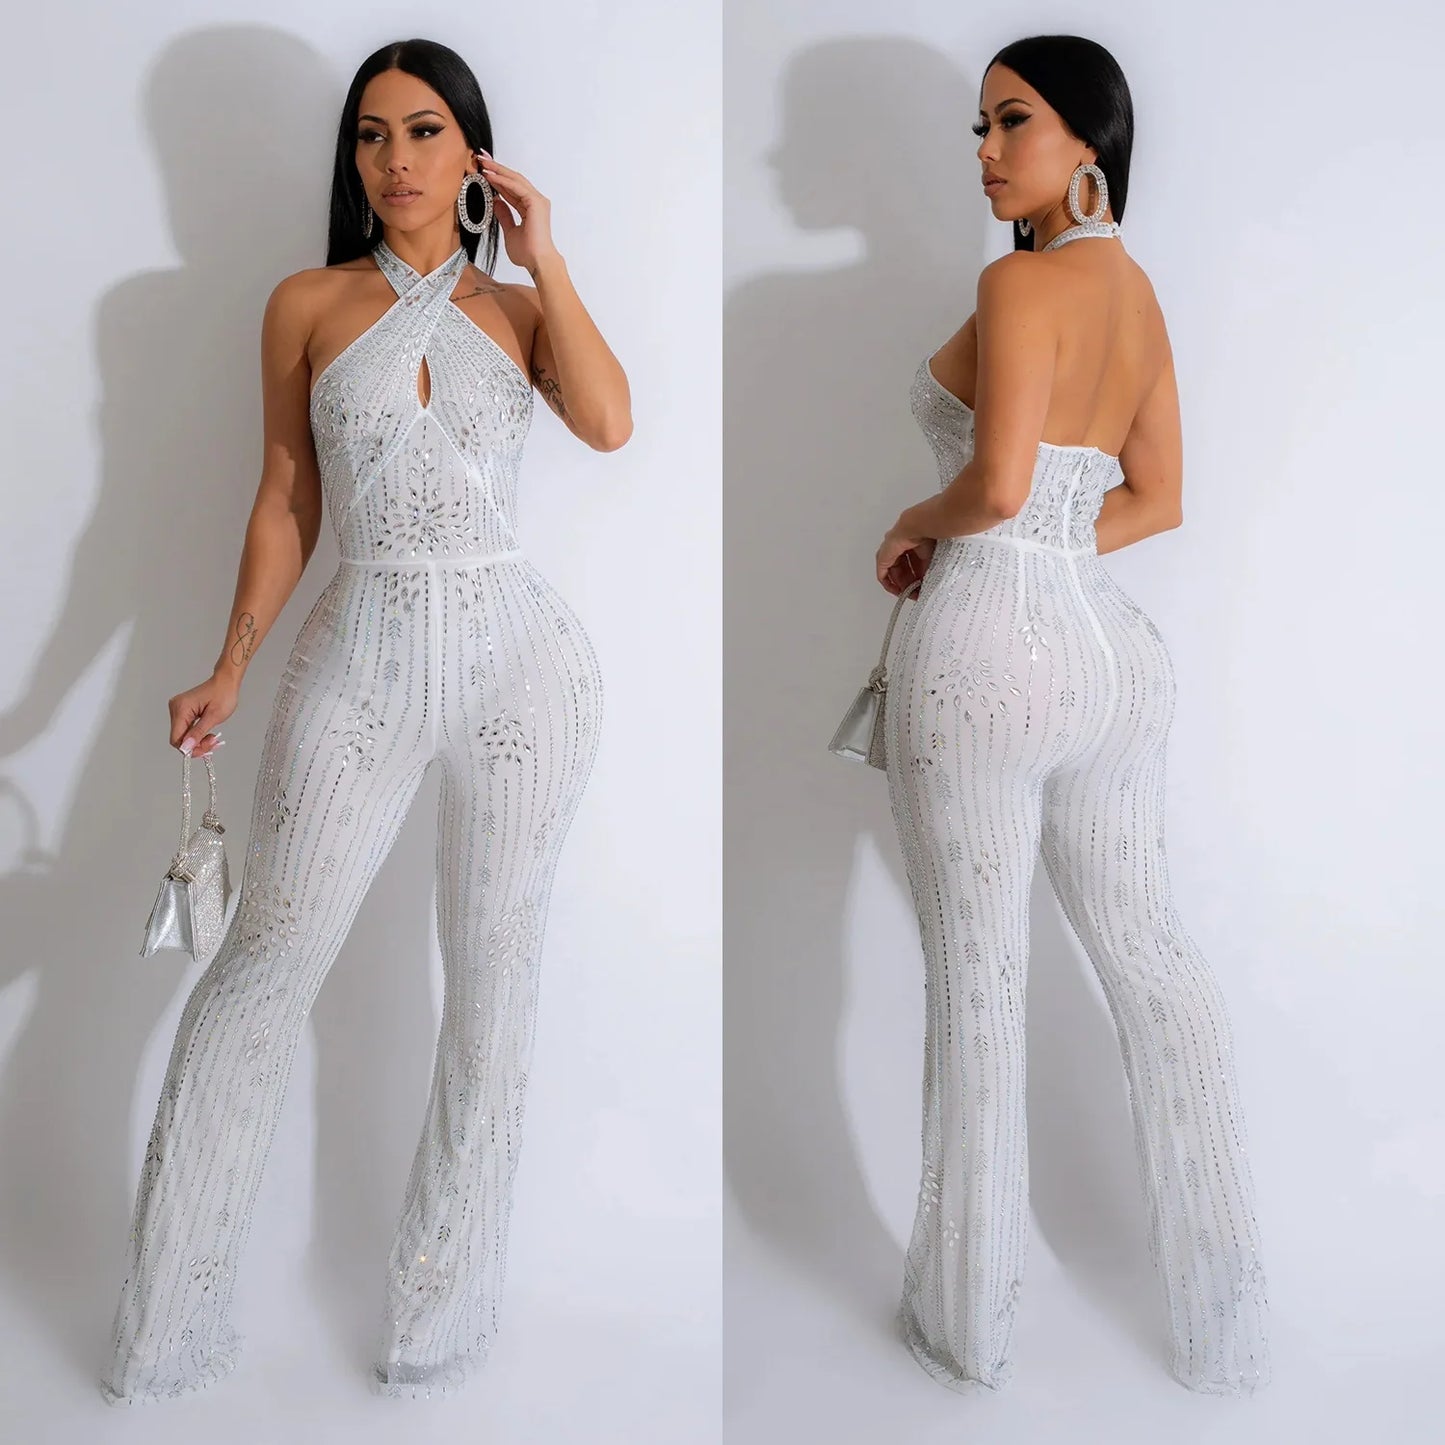 Elegant Sexy Rhinestone Halter Flare Jumpsuit Womans Clothing Luxury White Black Birthday Outfit Evening Party